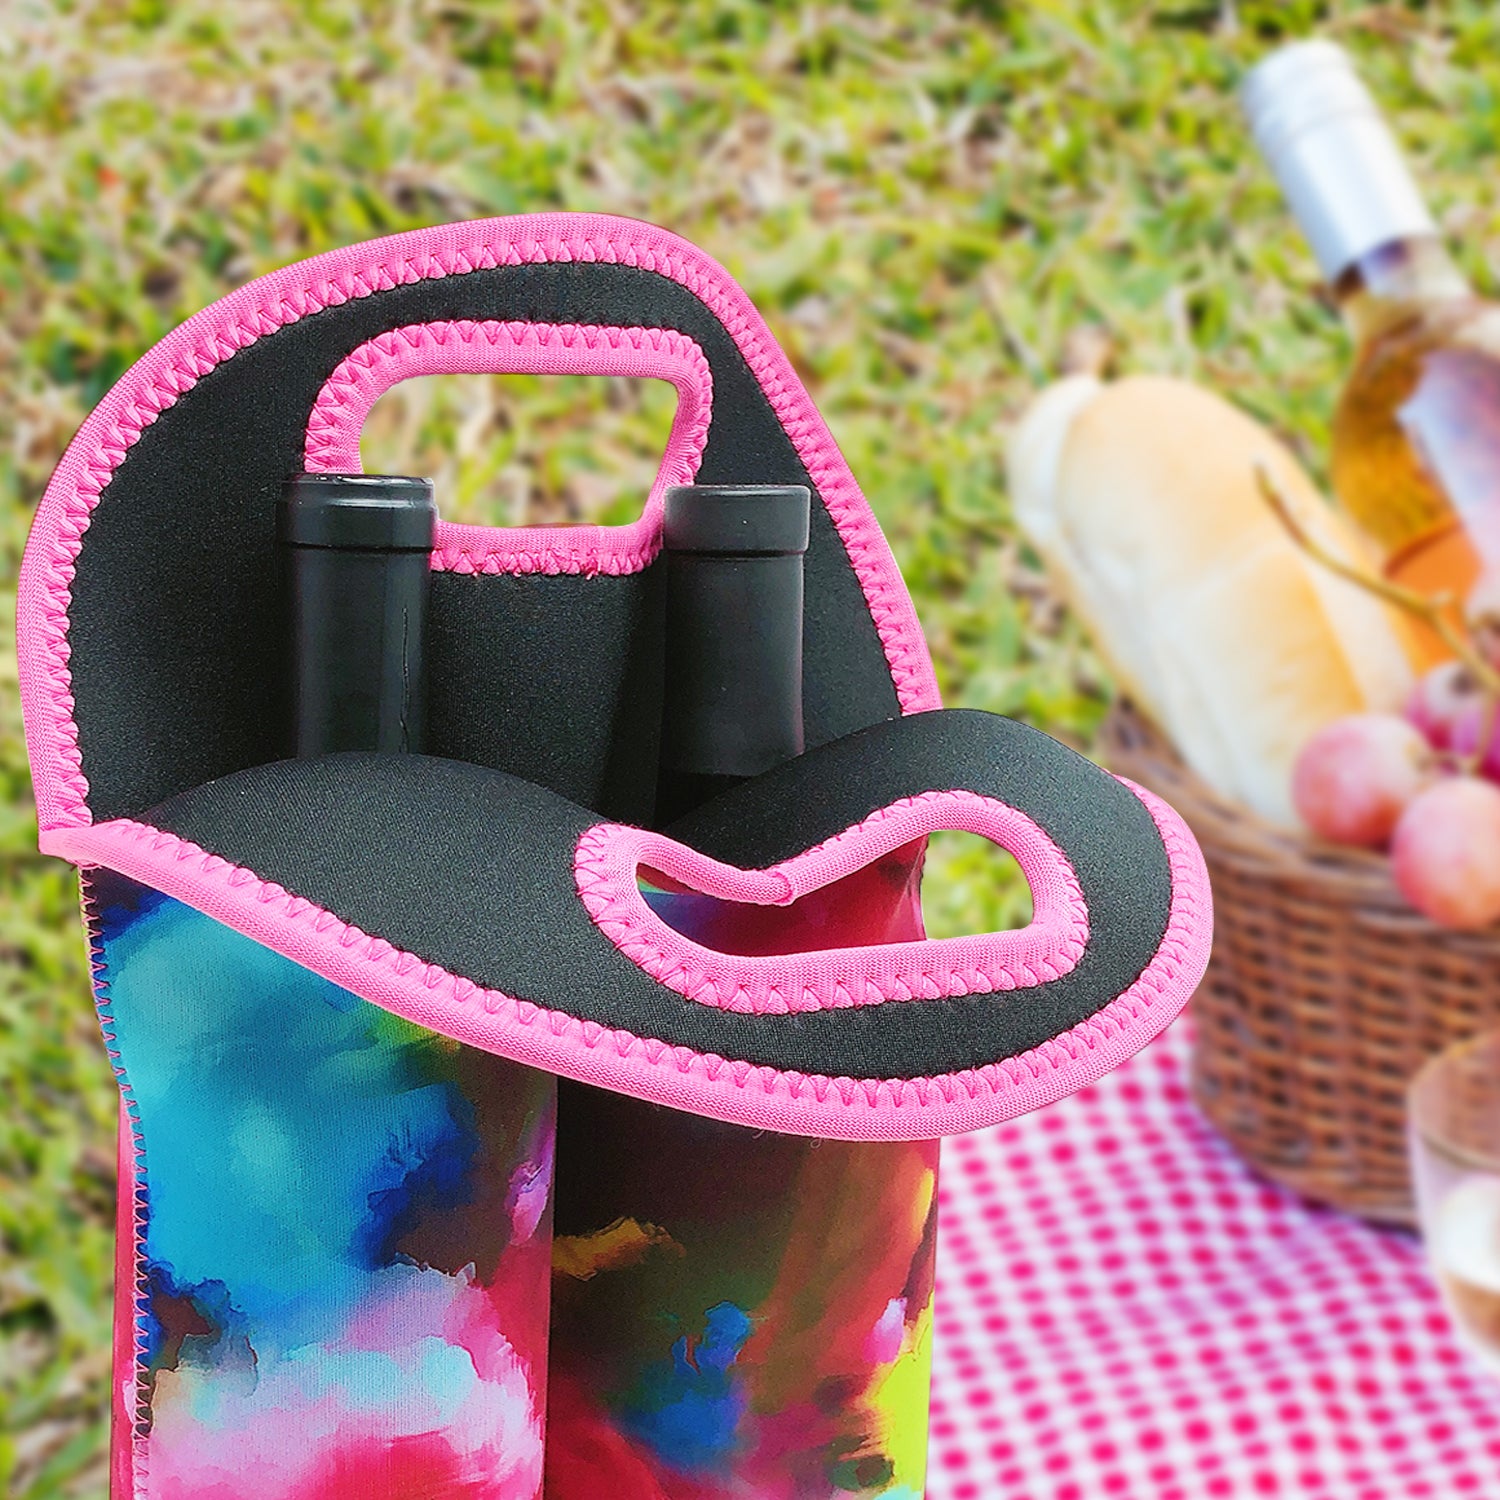 Wrapables Insulated Neoprene Wine Tote